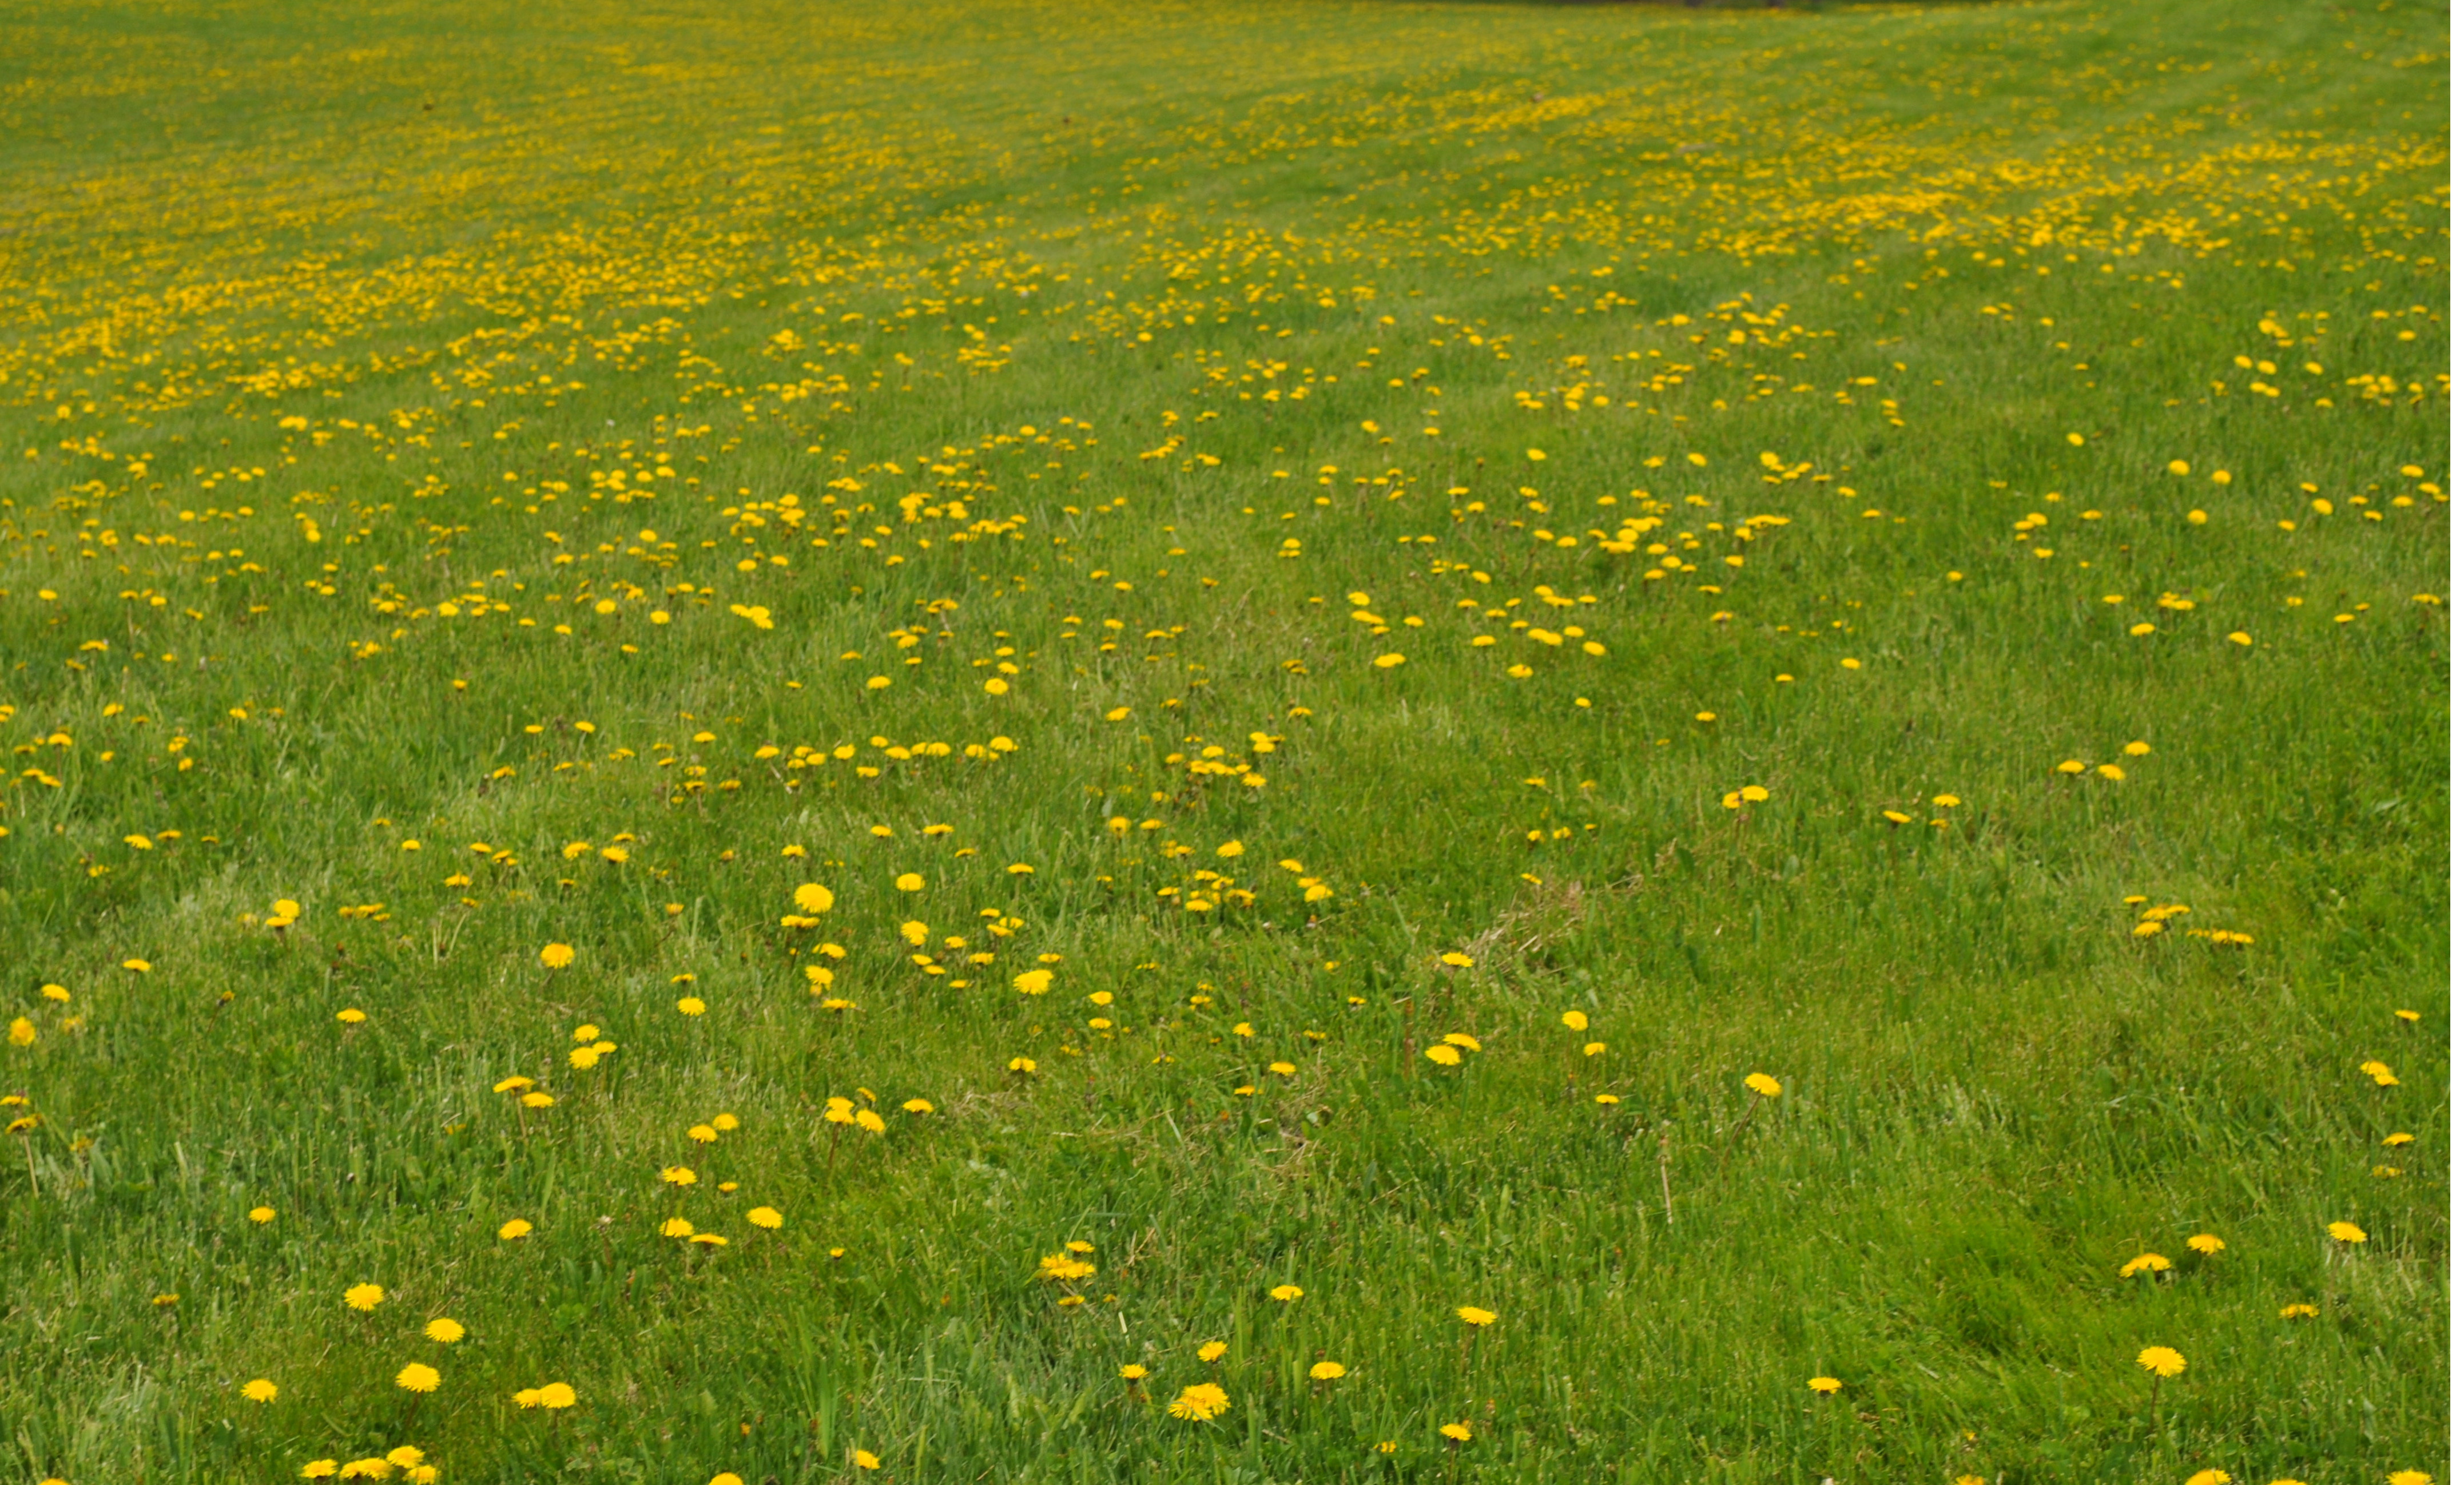 Fields of Grace (and dandelions) | An Unfinished Symphony